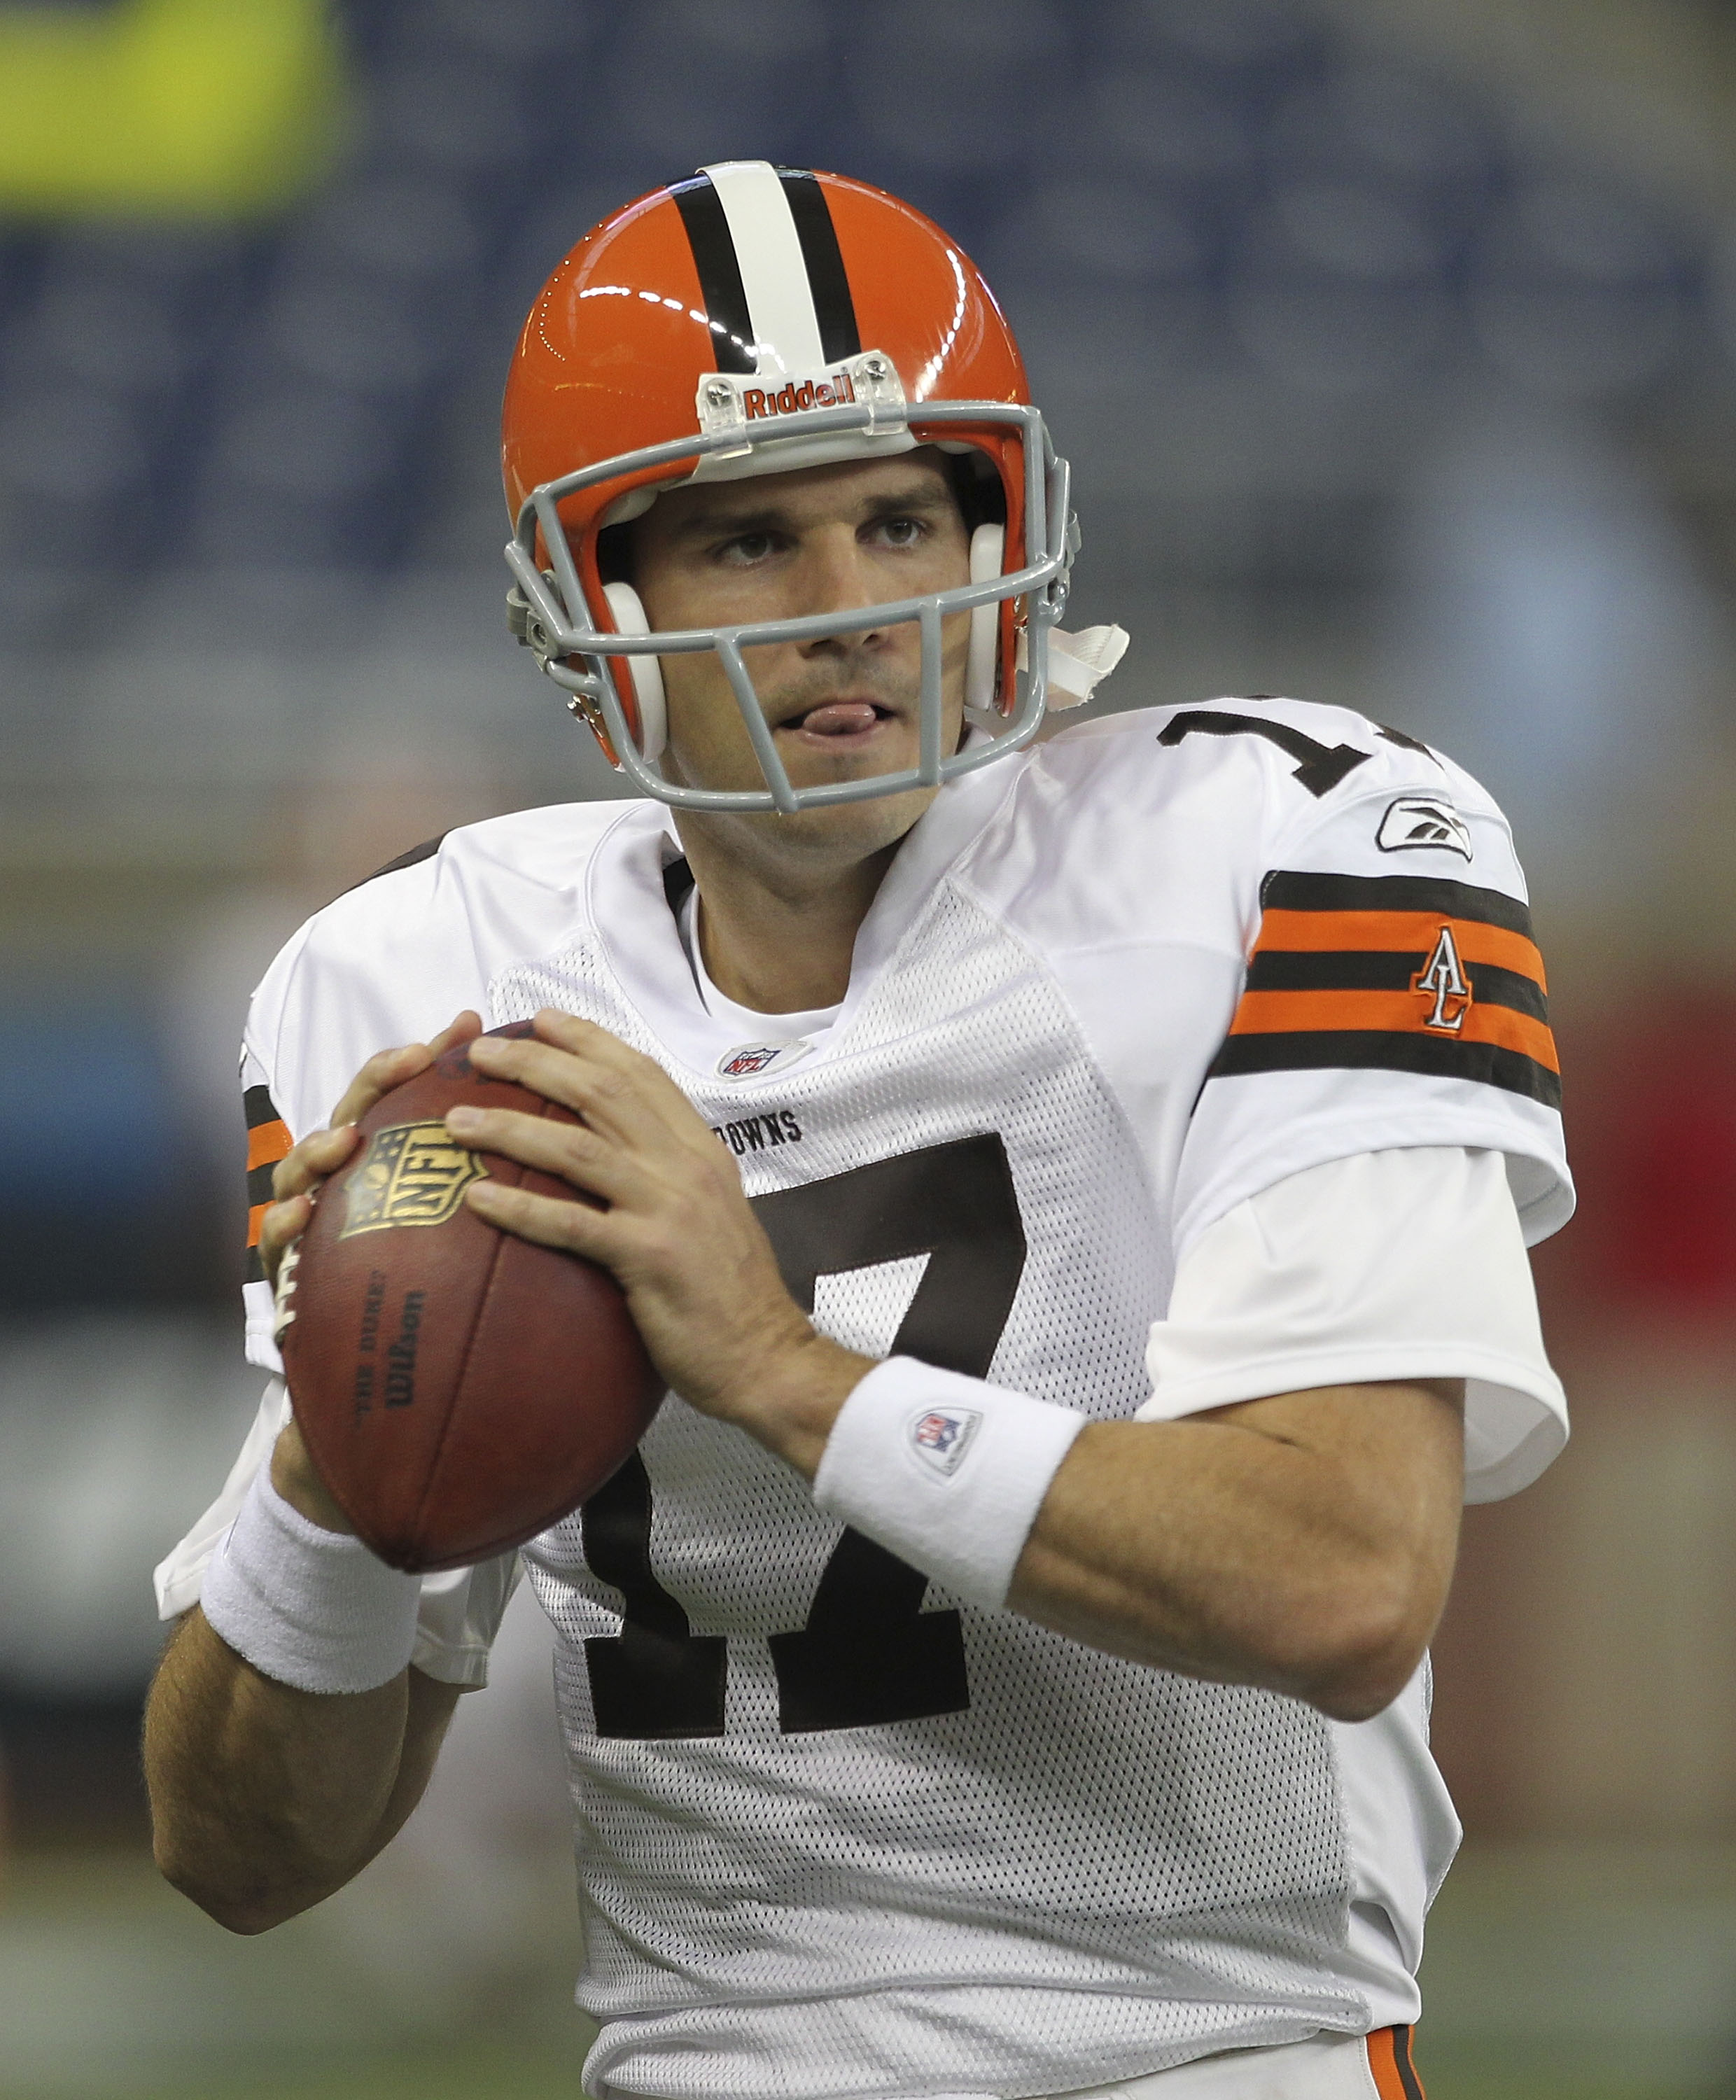 DETROIT - AUGUST 28: Jake Delhomme #17 of the Cleveland Browns warms up prior to the start of the preseason game against the Detroit Lions at Ford Field on August 28, 2010 in Detroit, Michigan. (Photo by Leon Halip/Getty Images)